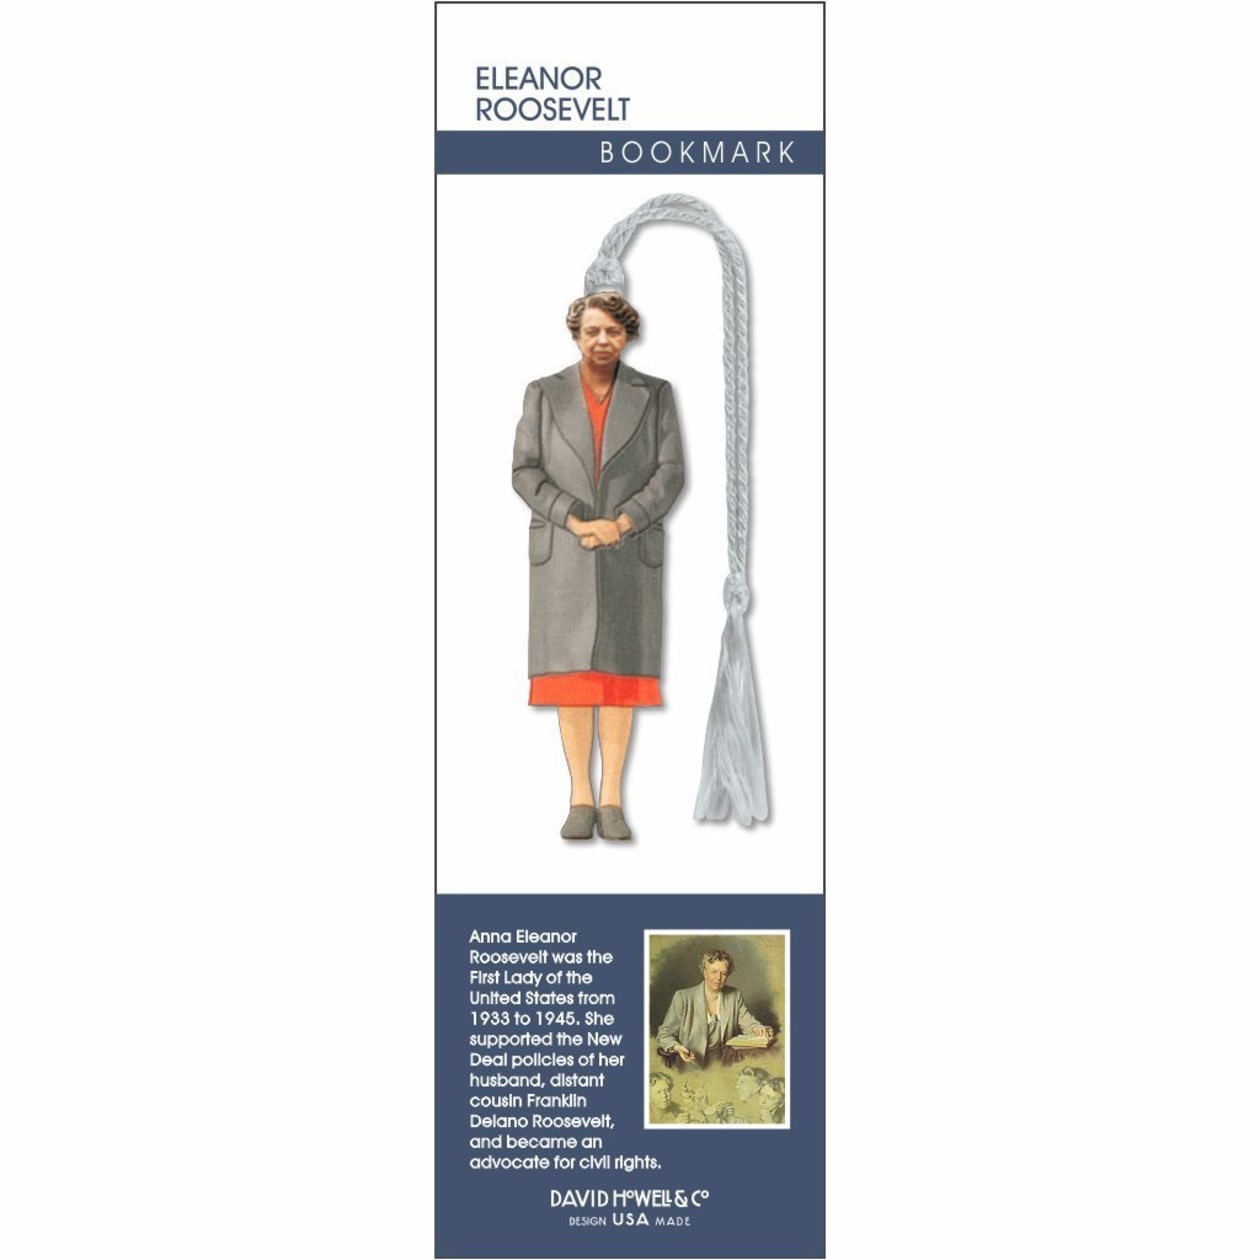 Eleanor Roosevelt Metal Bookmark | Electro-Plated on Solid Brass